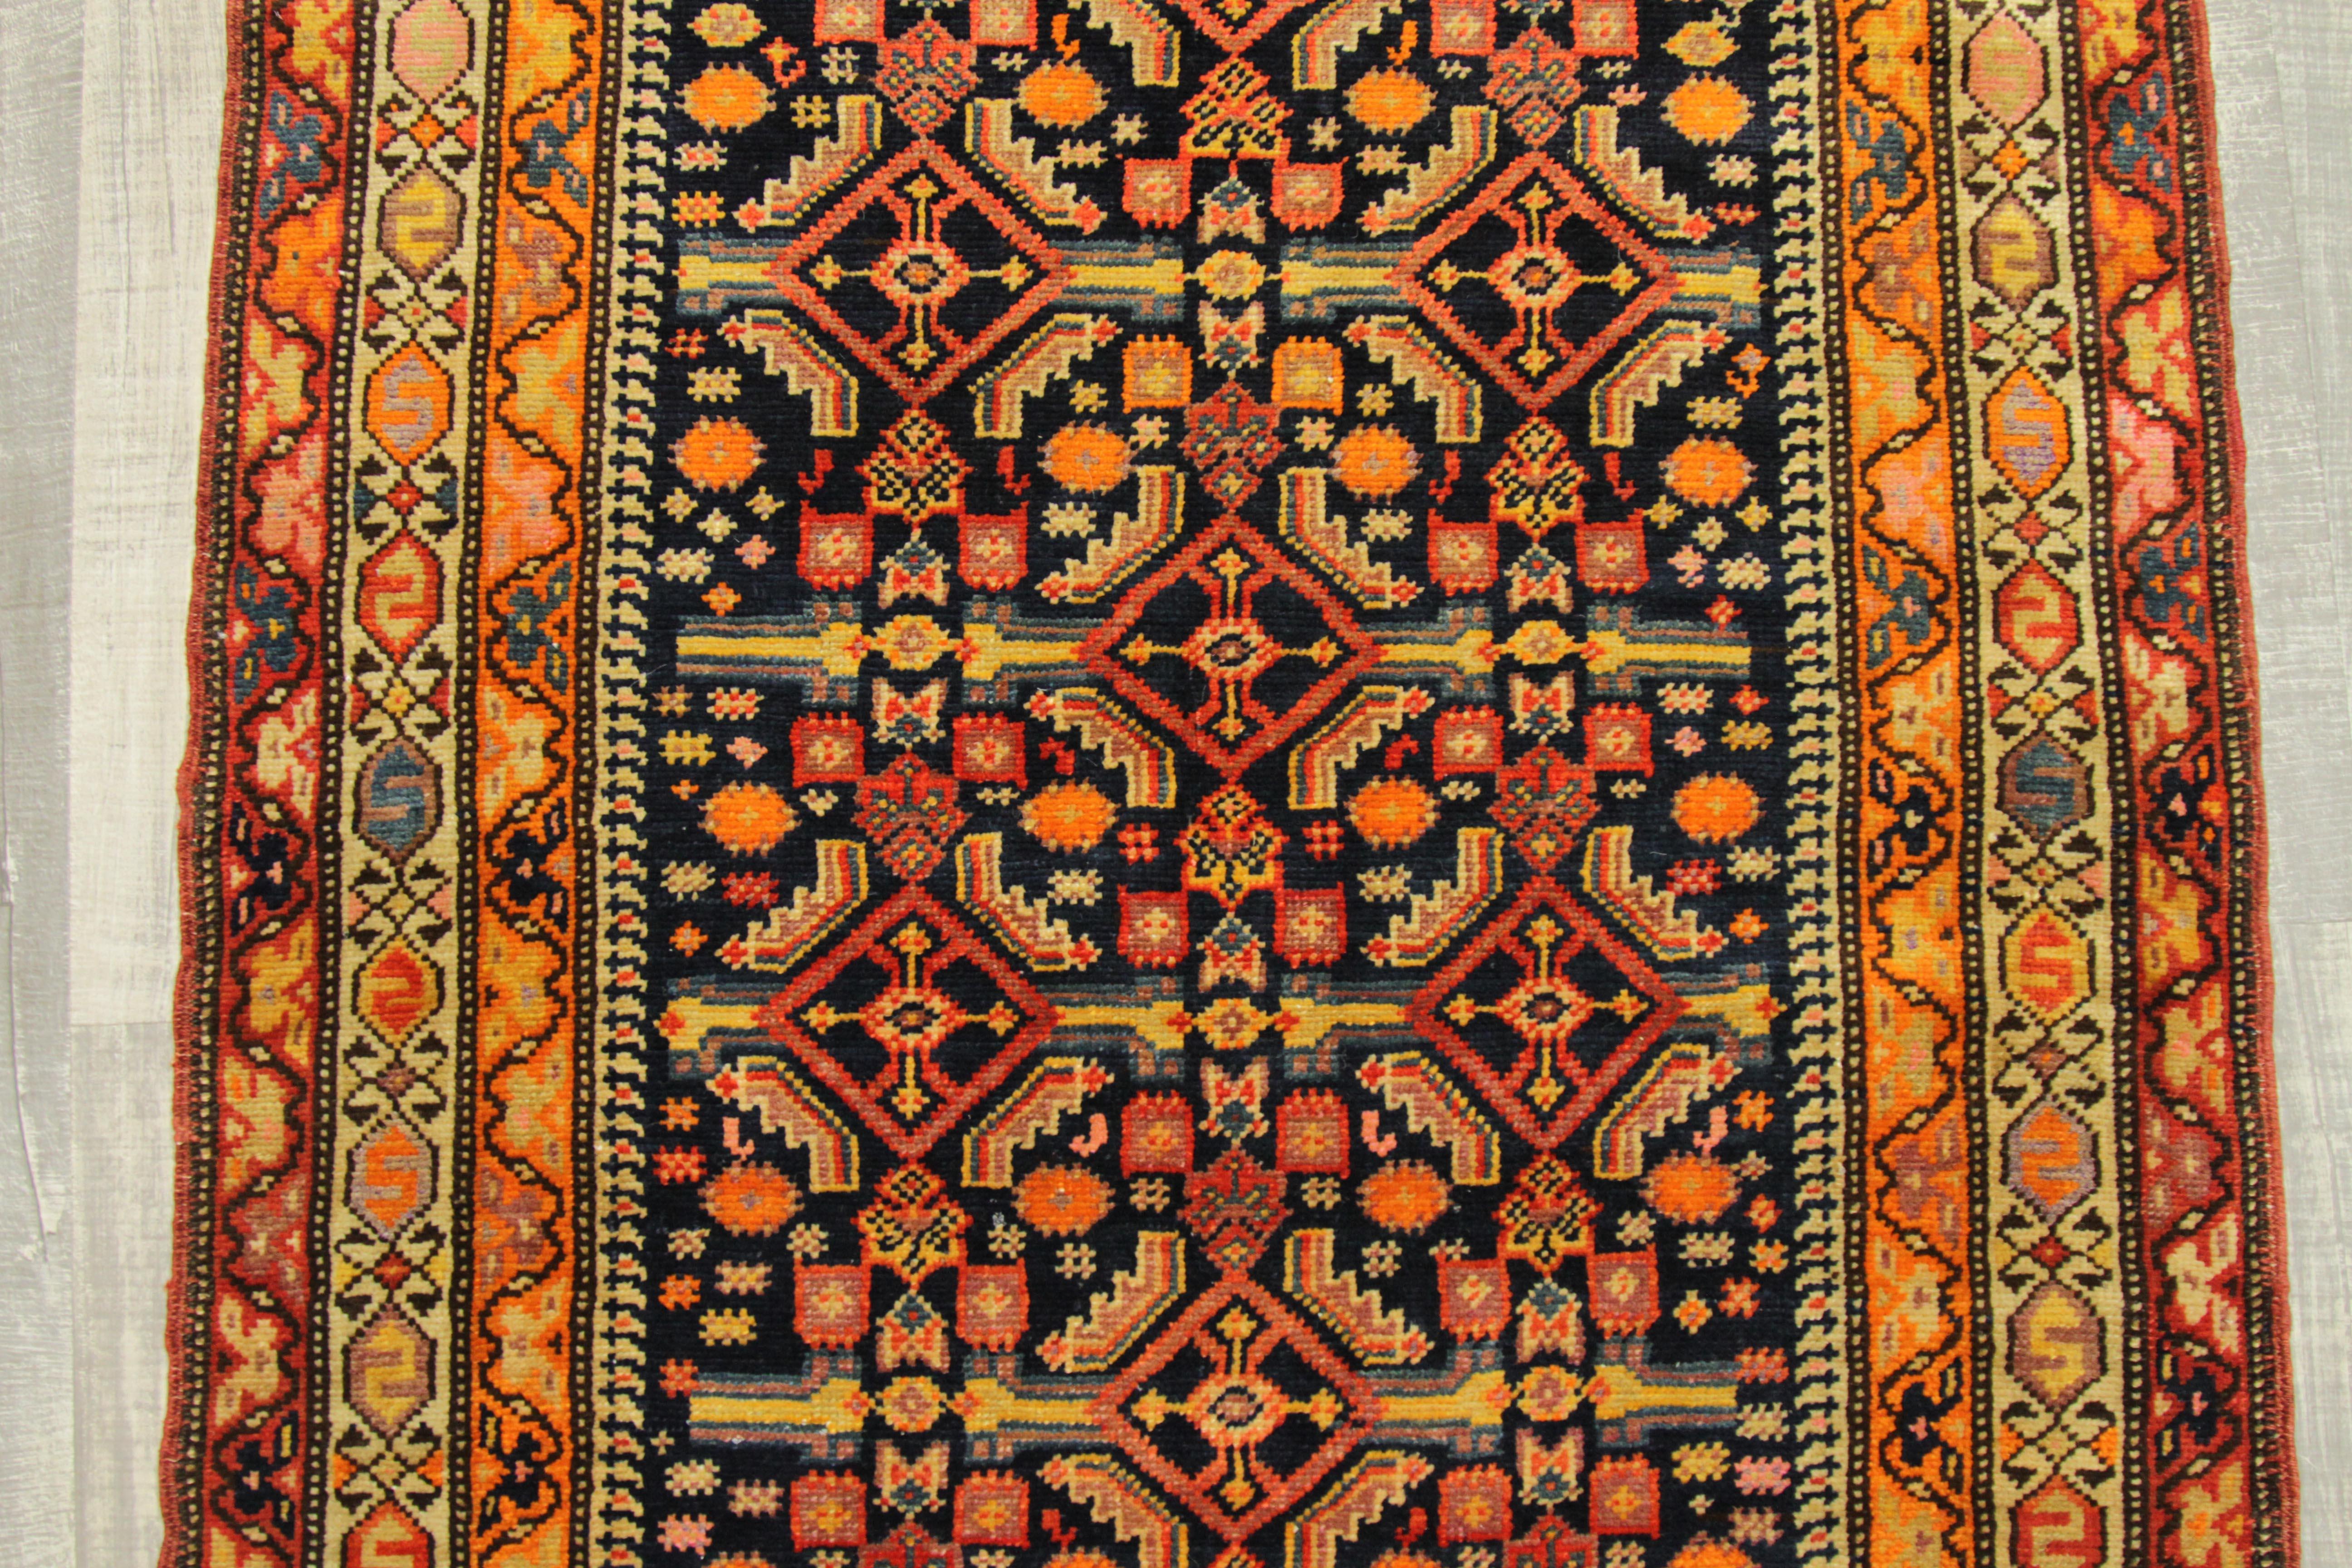 1910s Antique Persian Rug Azerbaijan Style with Fine Floral and Geometric Design In Excellent Condition For Sale In Dallas, TX